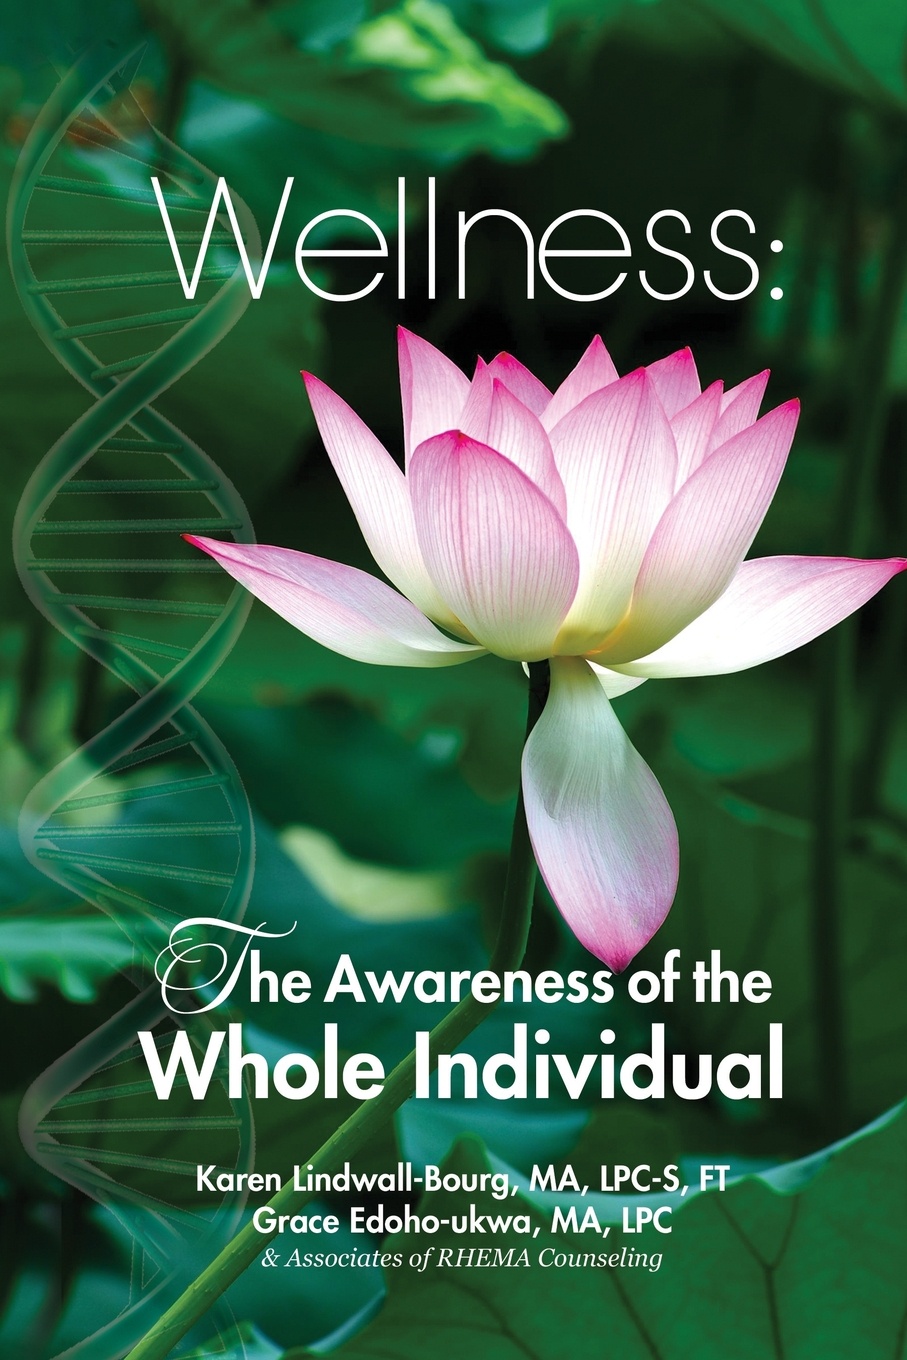 Wellness. The Awareness of the Whole Individual